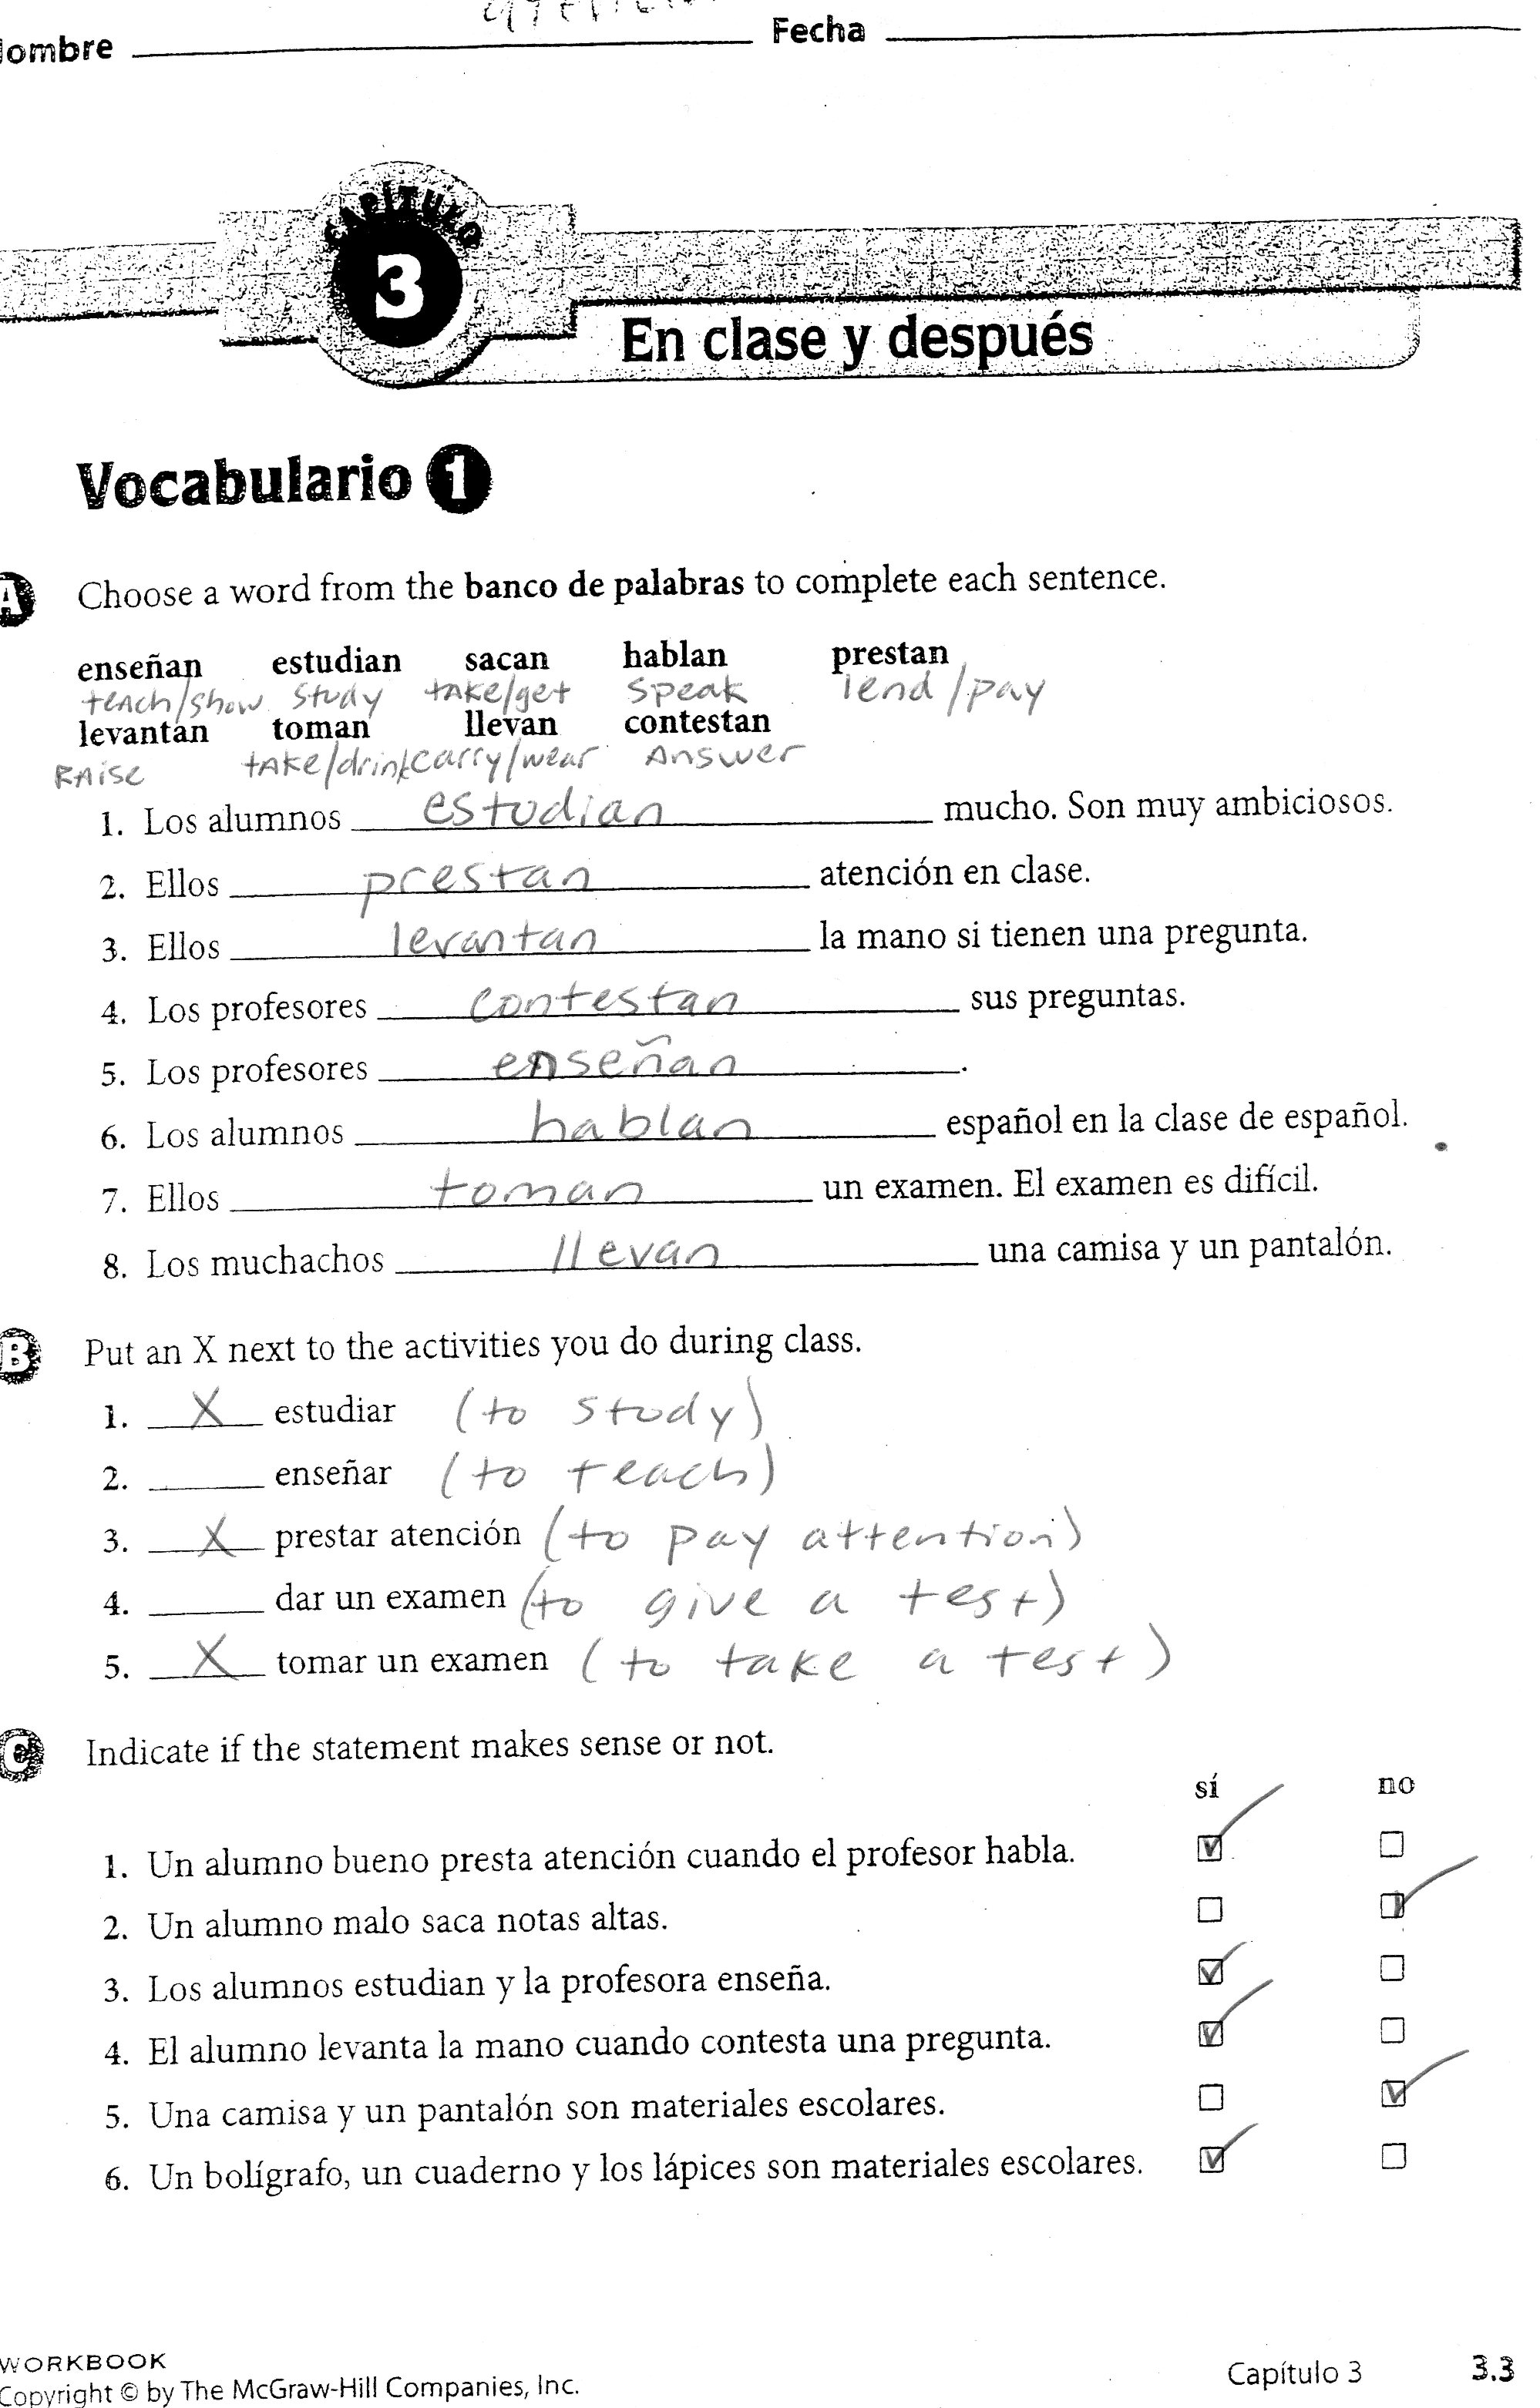 14-best-images-of-conjugation-worksheet-2-answers-el-verbo-exacto-answers-chemistry-unit-5